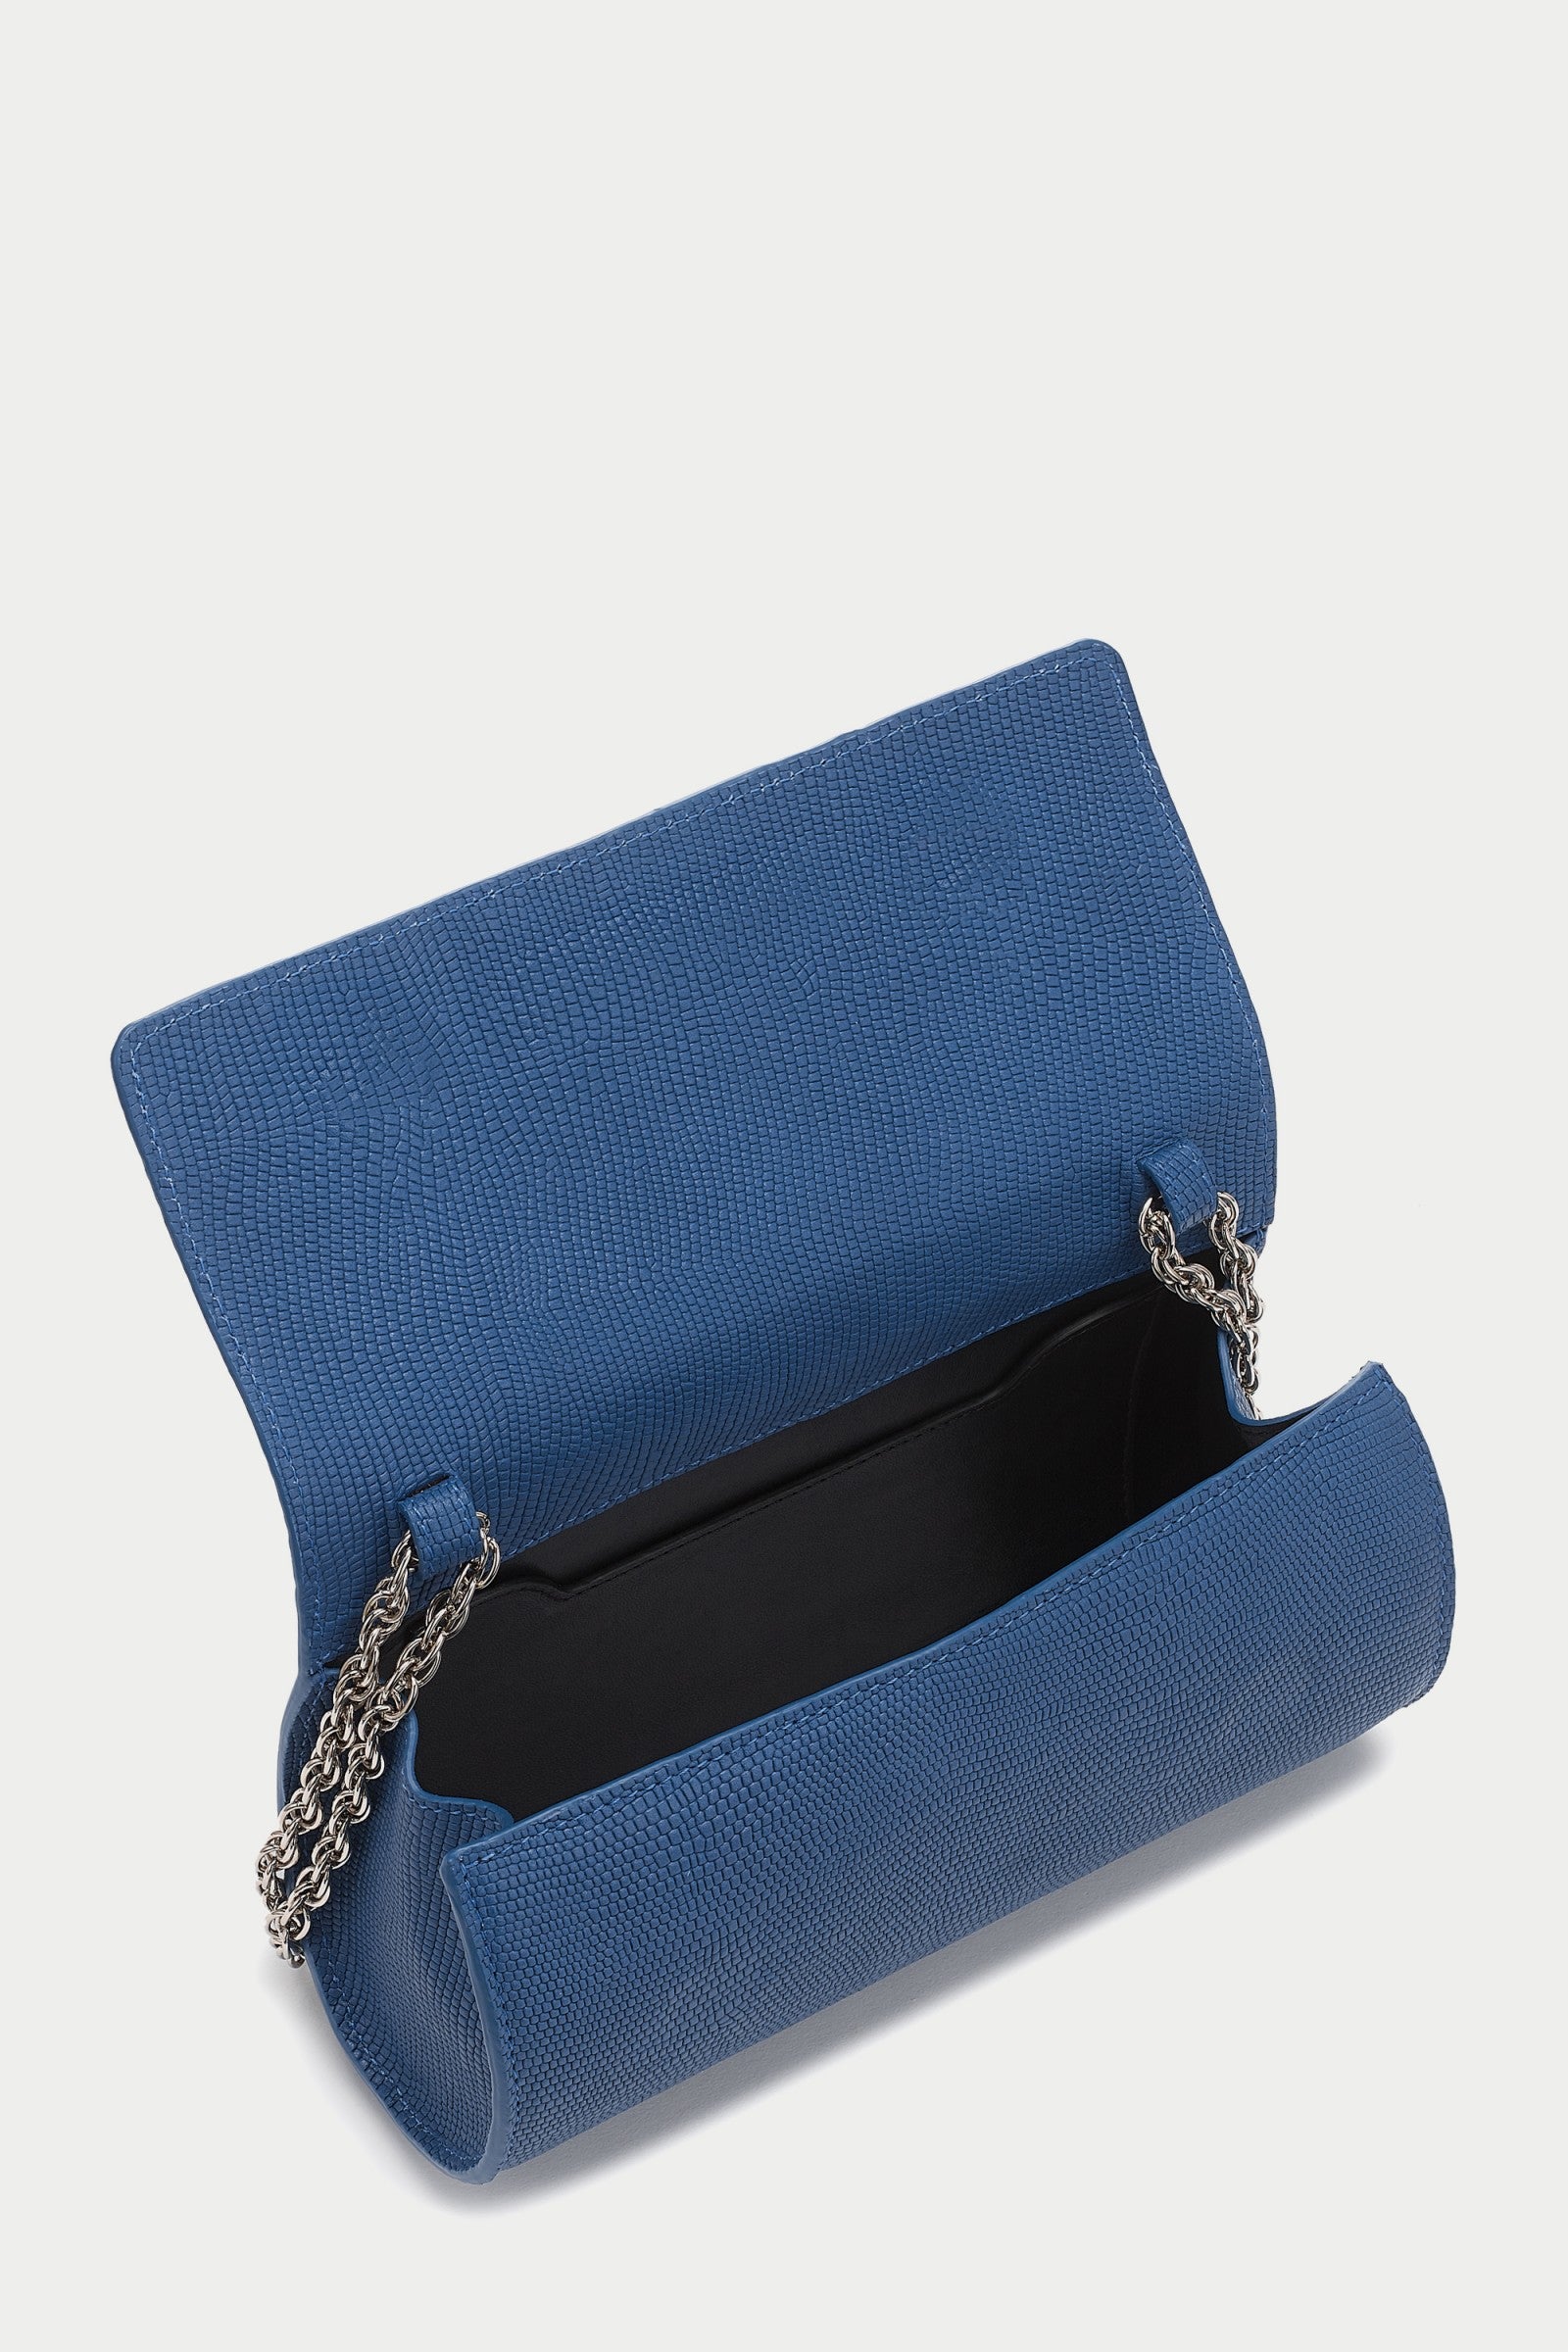 Kinsely MARE Leather Roll Clutch